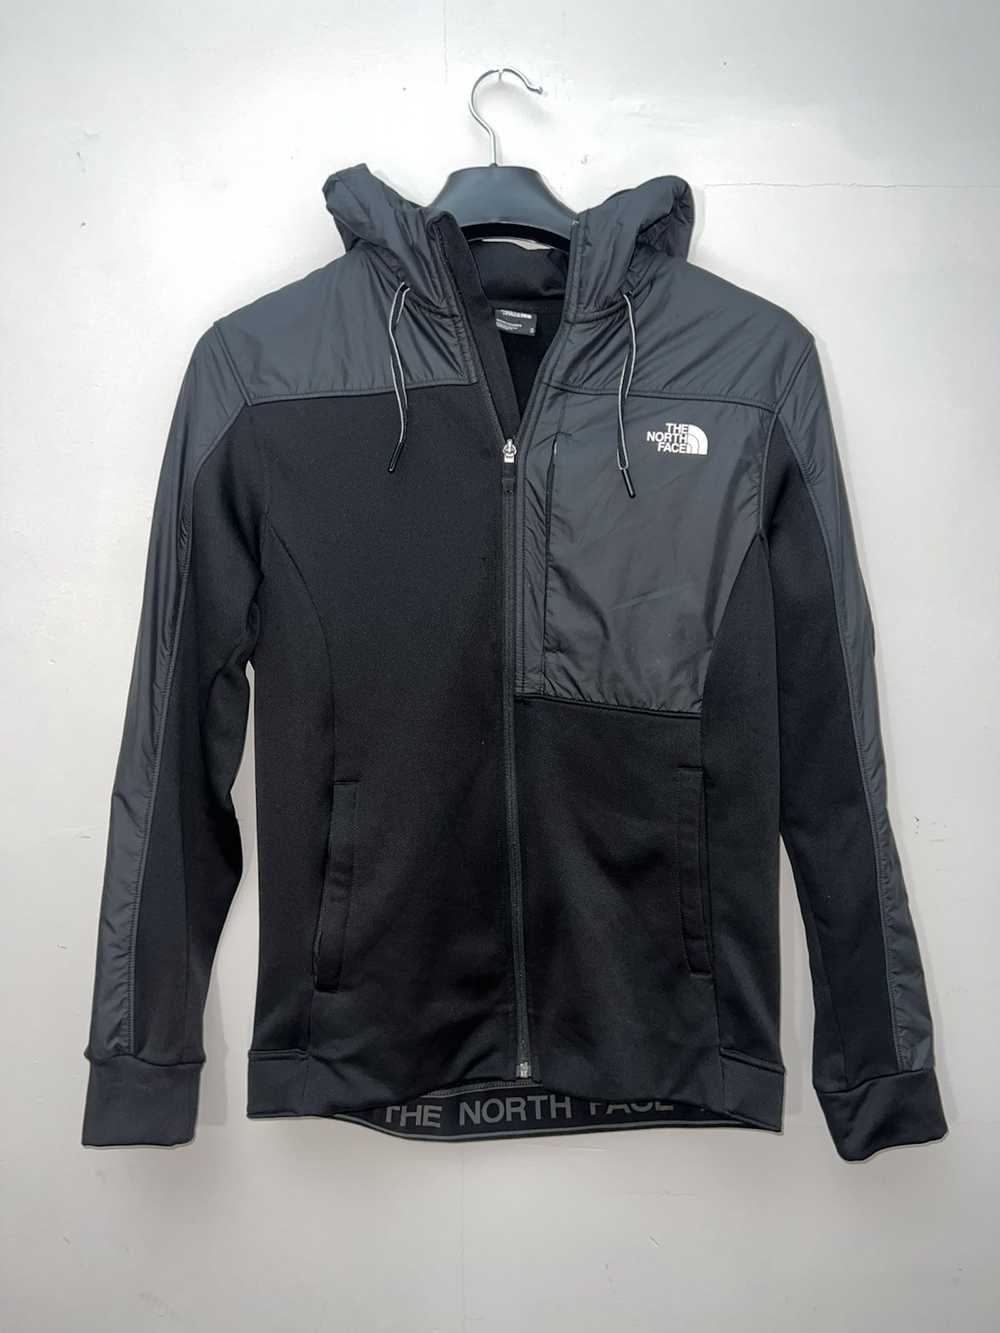 The North Face North Face Light Sport Jacket - image 1